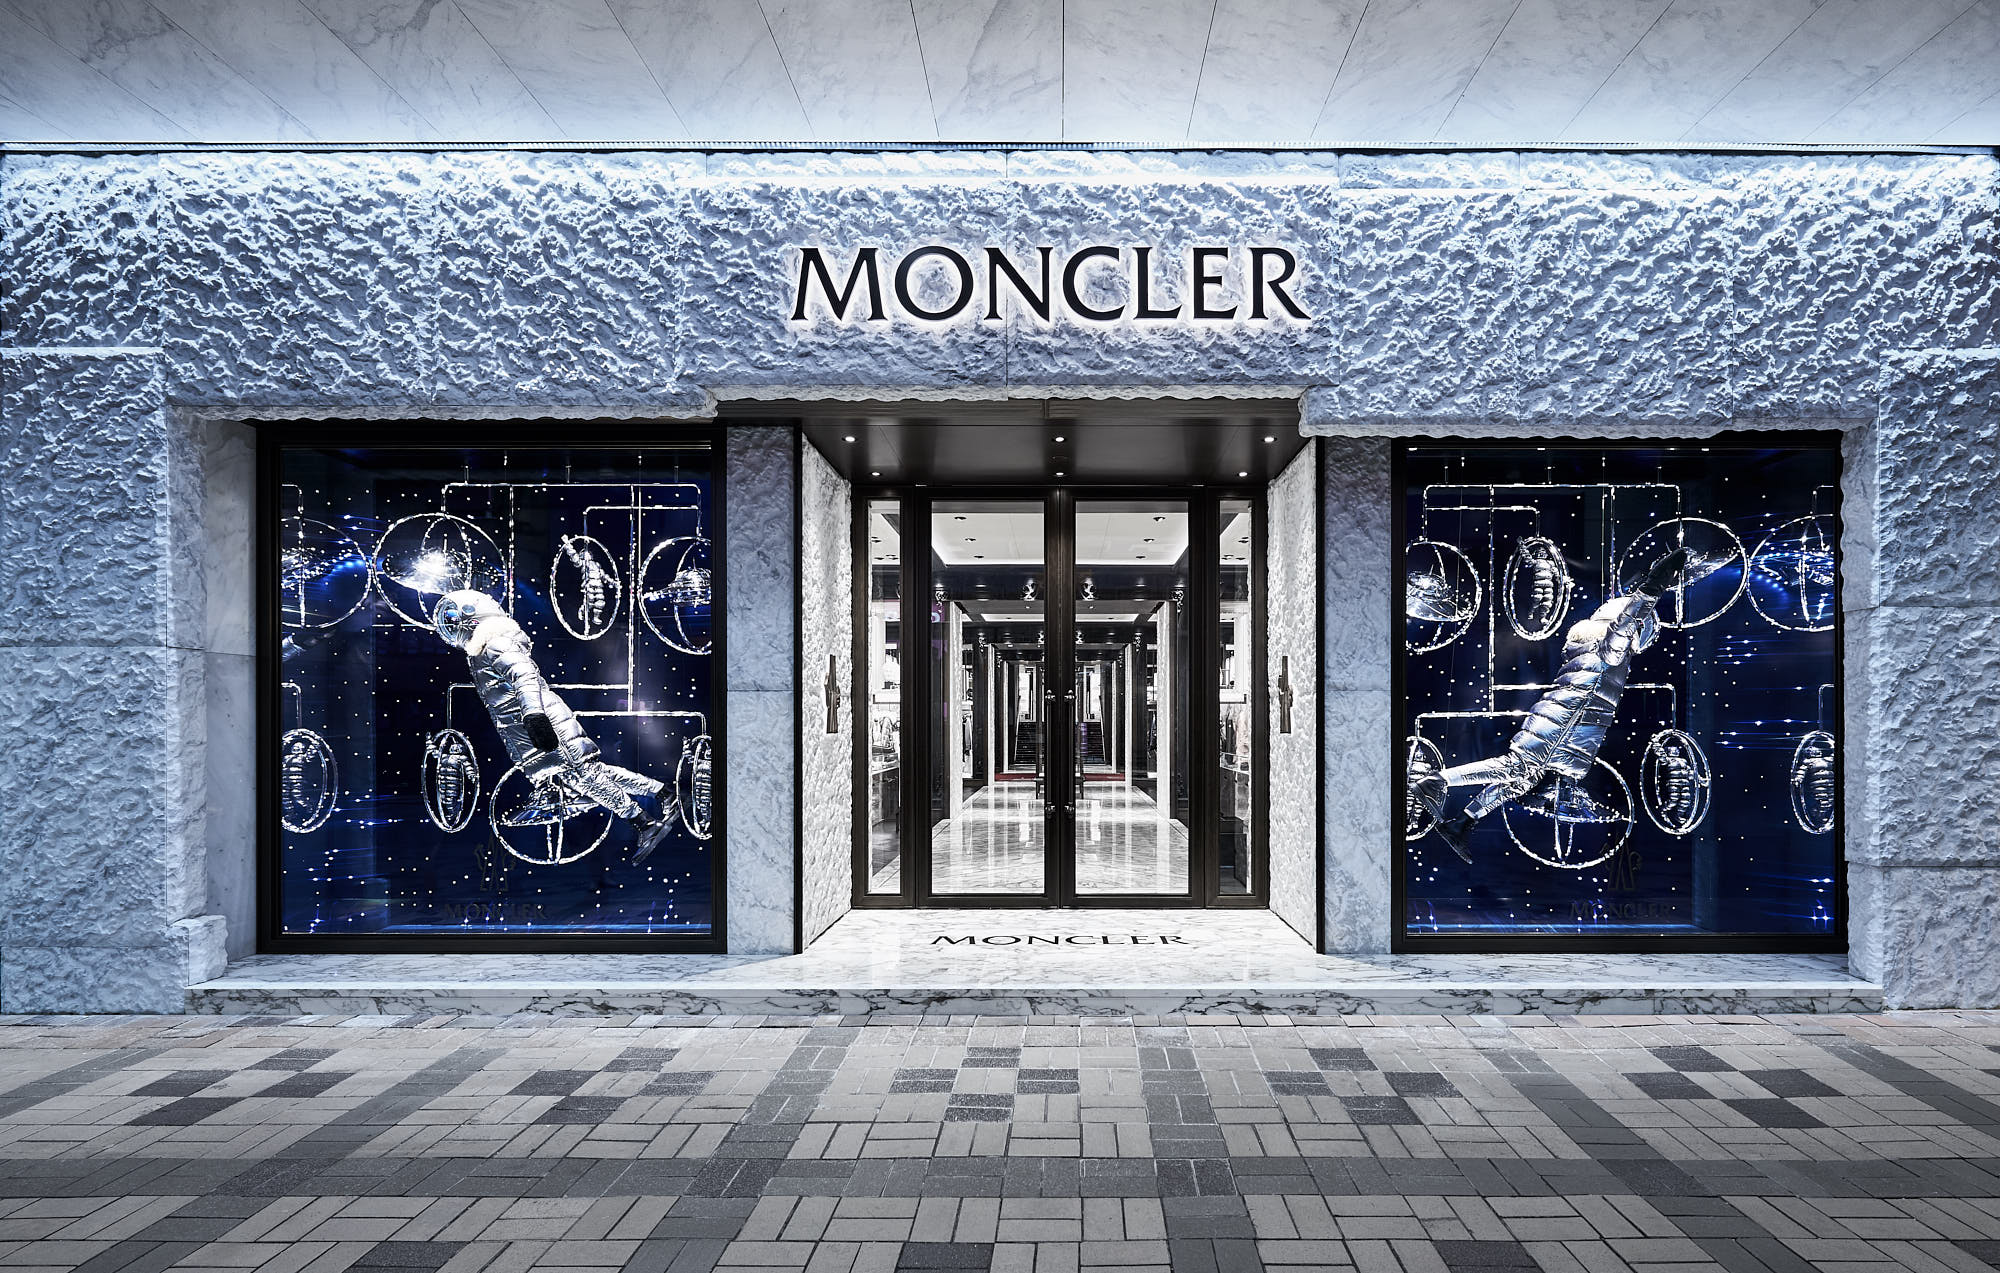 Marketing Strategies, Marketing Mix and STP of Moncler